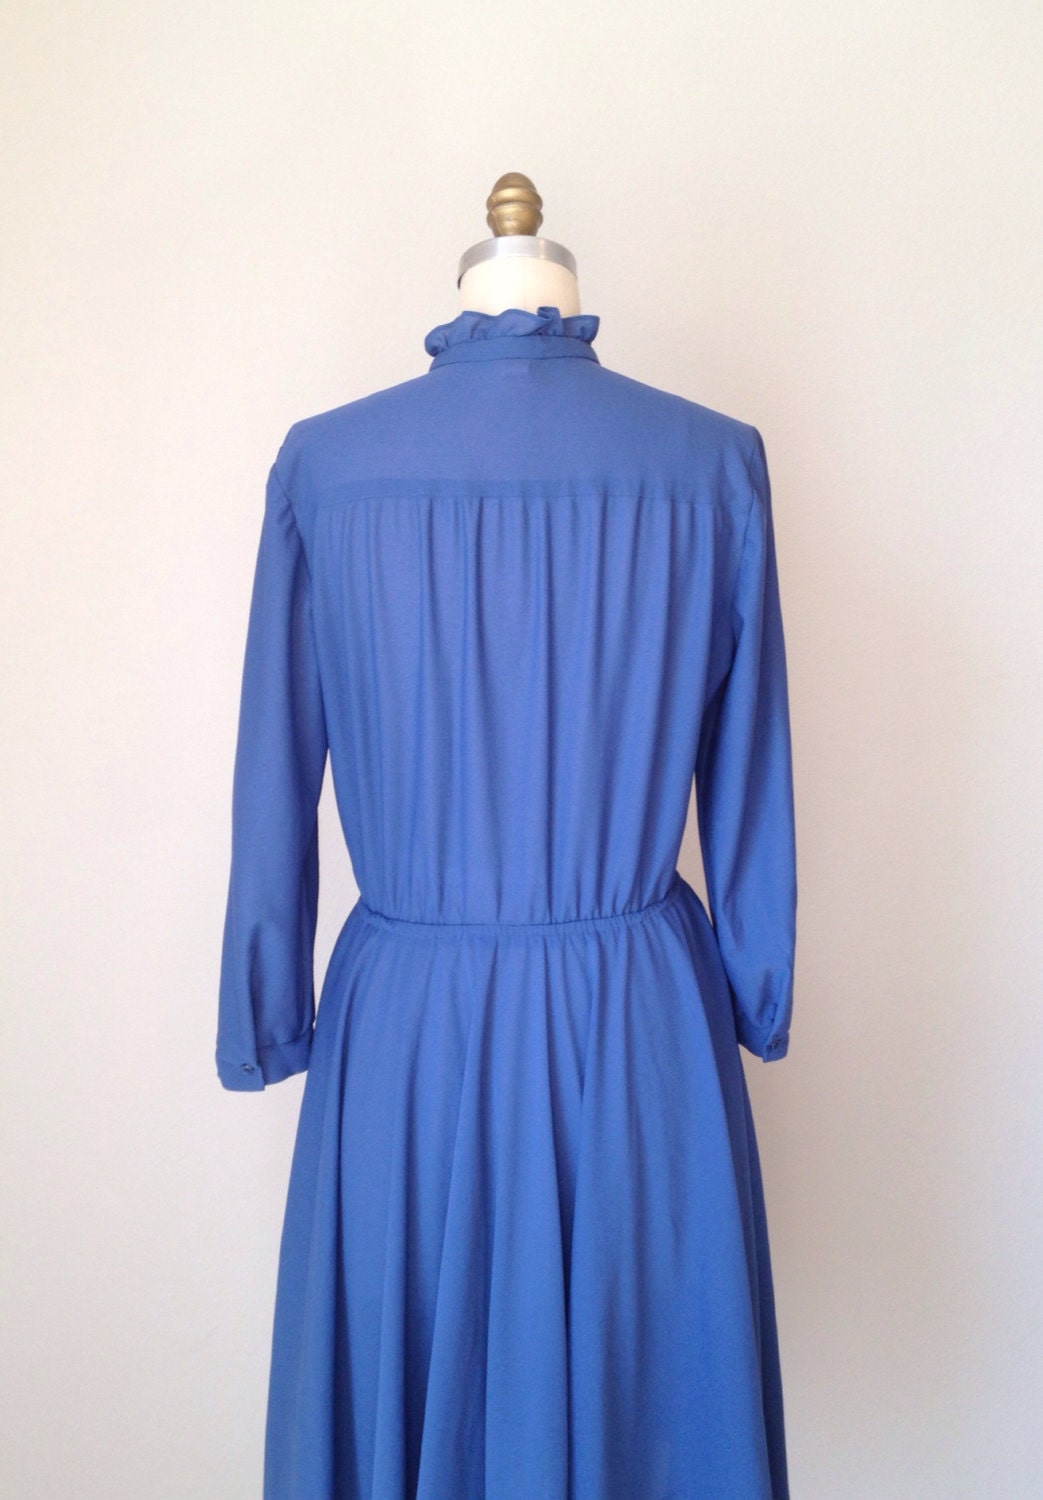 Vintage 70s Country Blue Shirt Dress // Long sleeve dress size